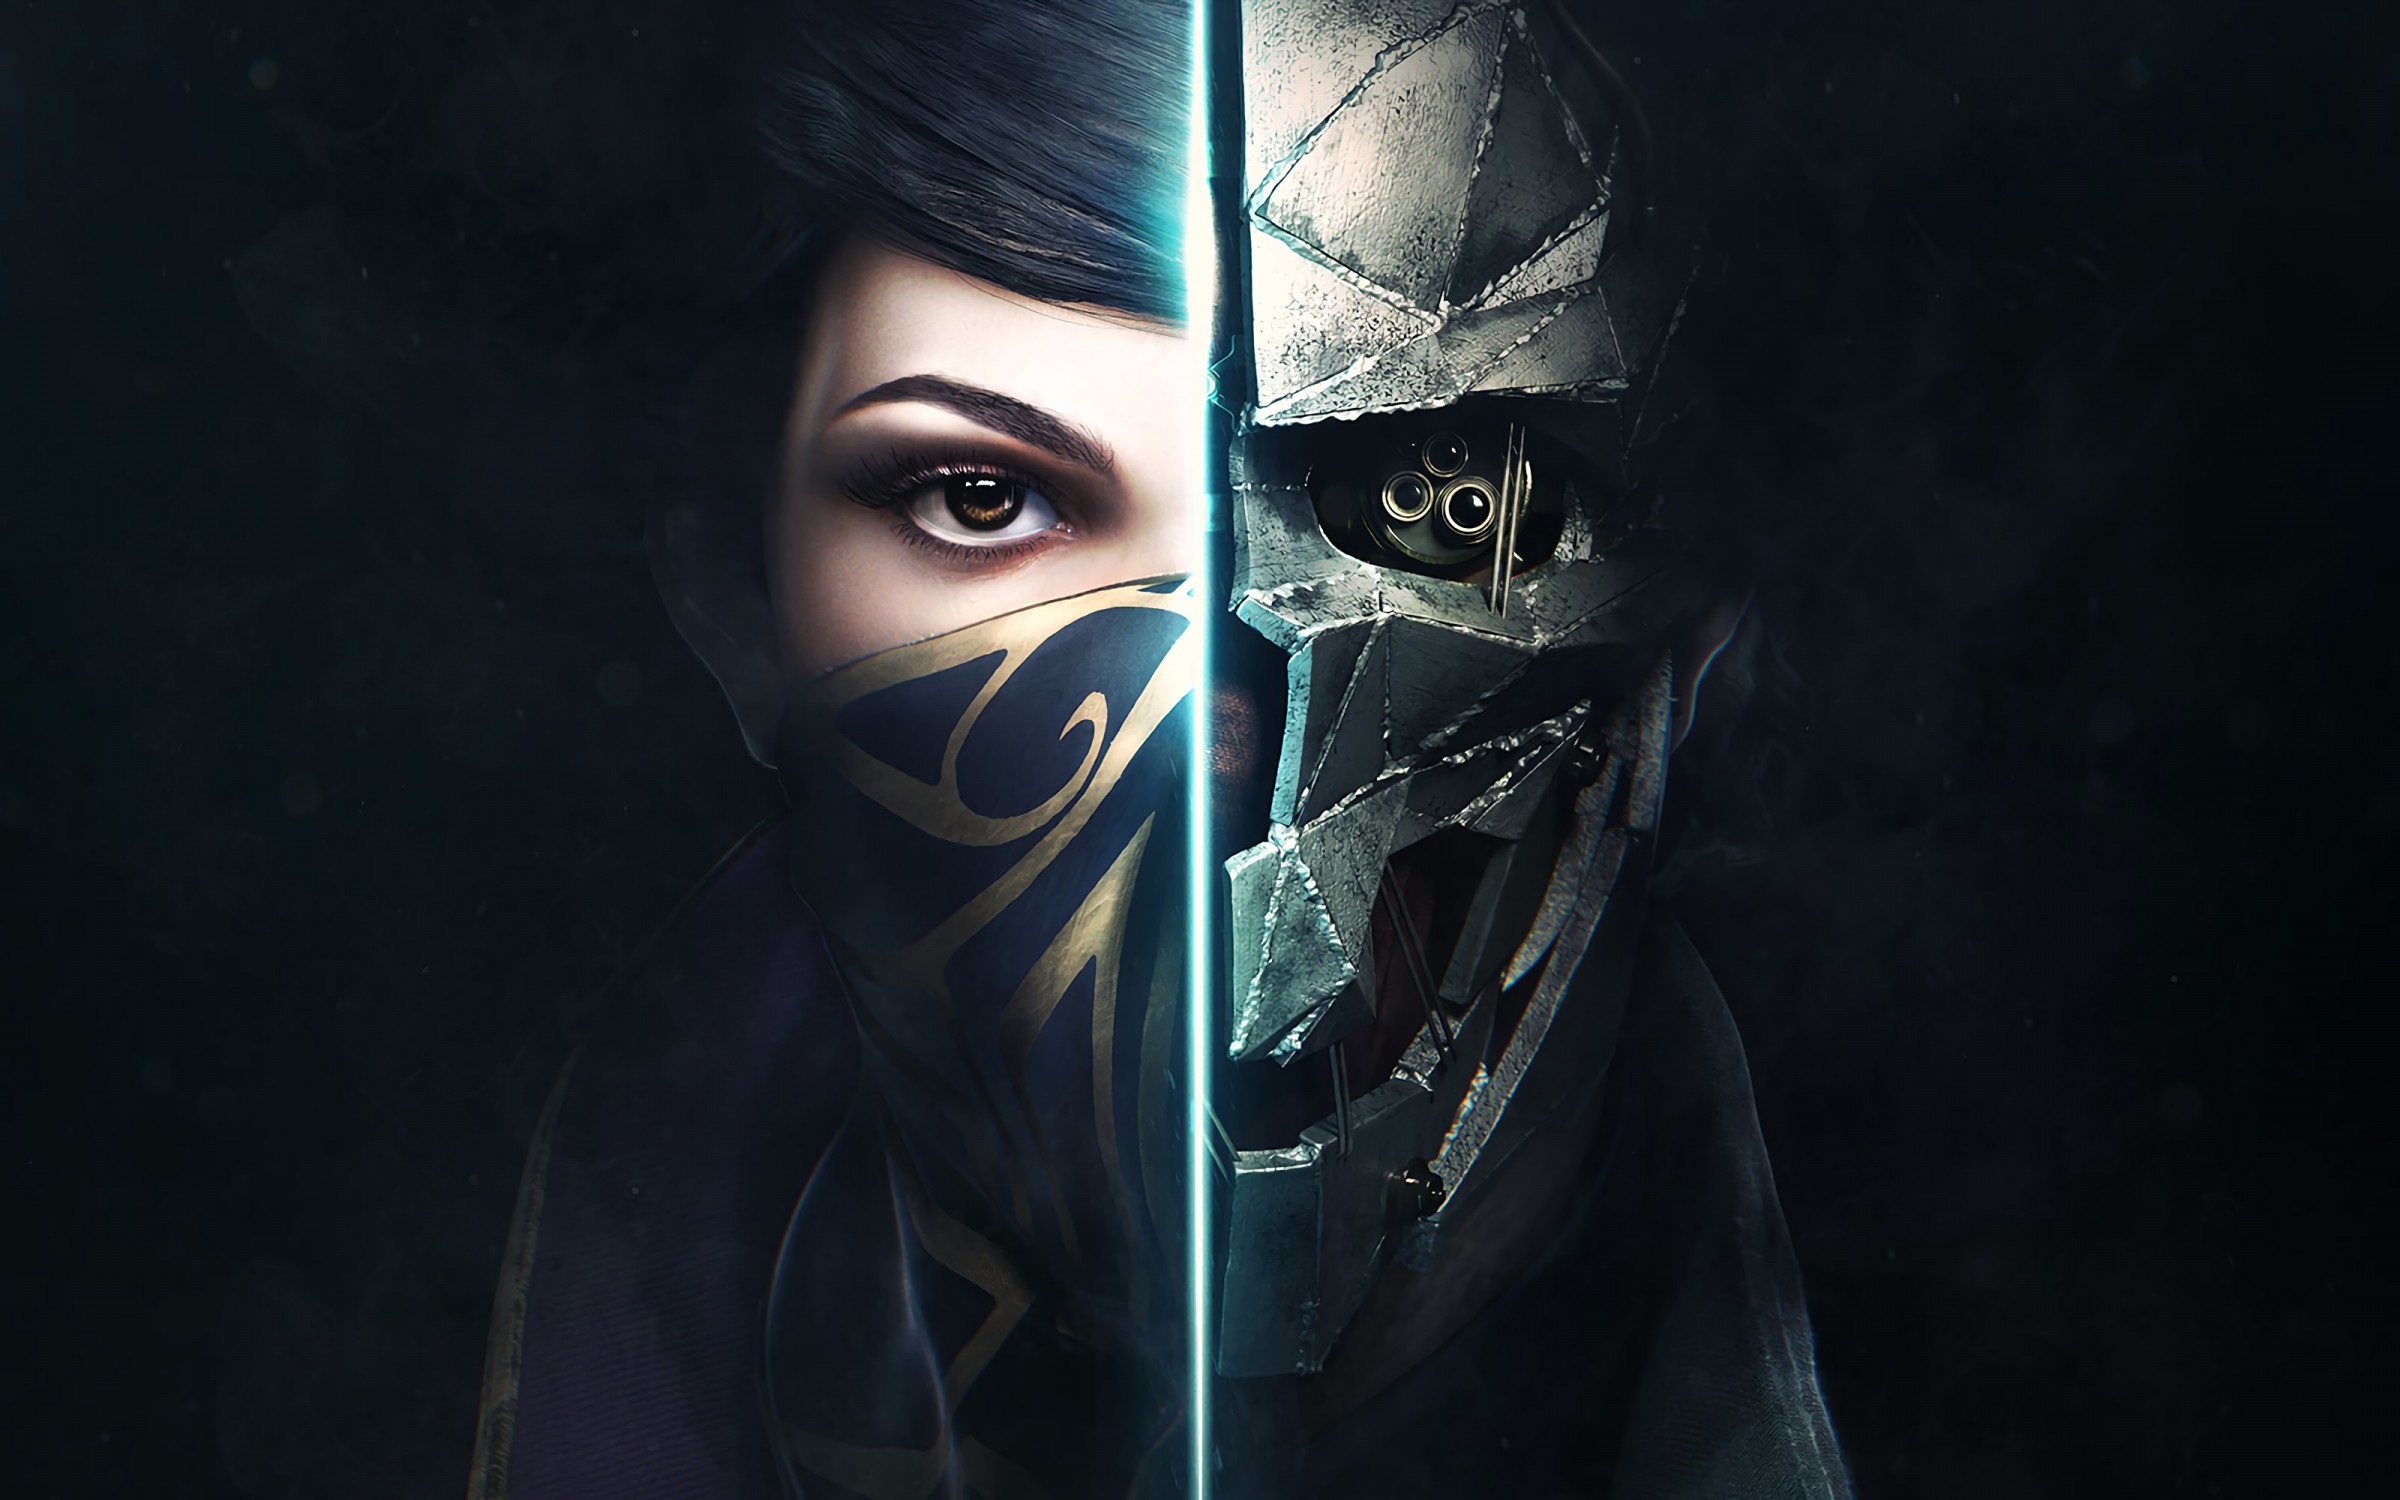 dishonored 2 images Is Cool Wallpapers GeekFeed's Top 10 Games of 2016